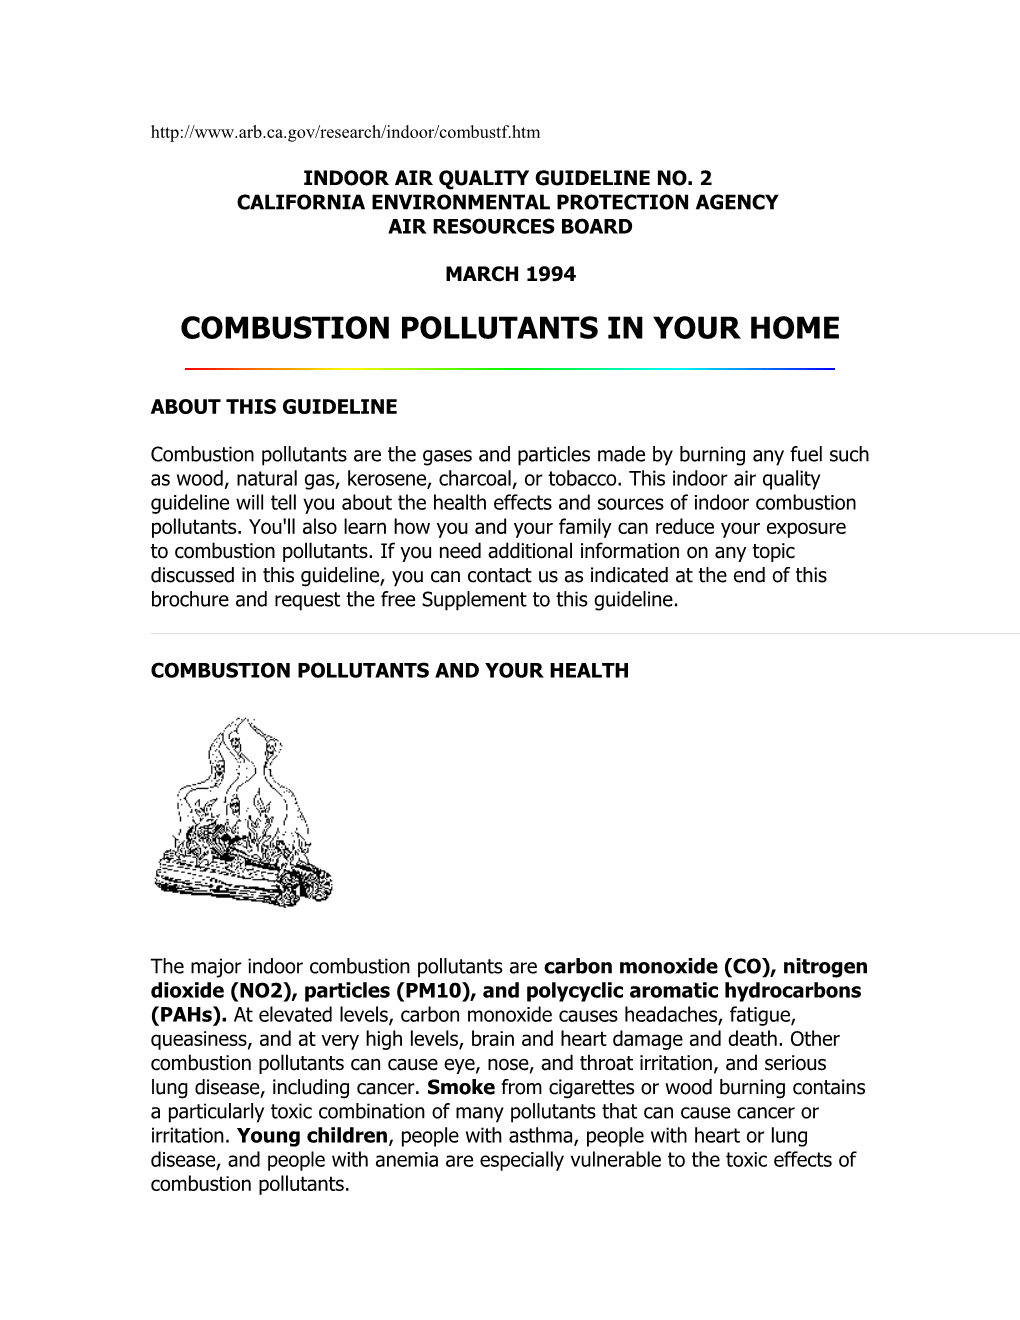 Indoor Air Quality Guideline No